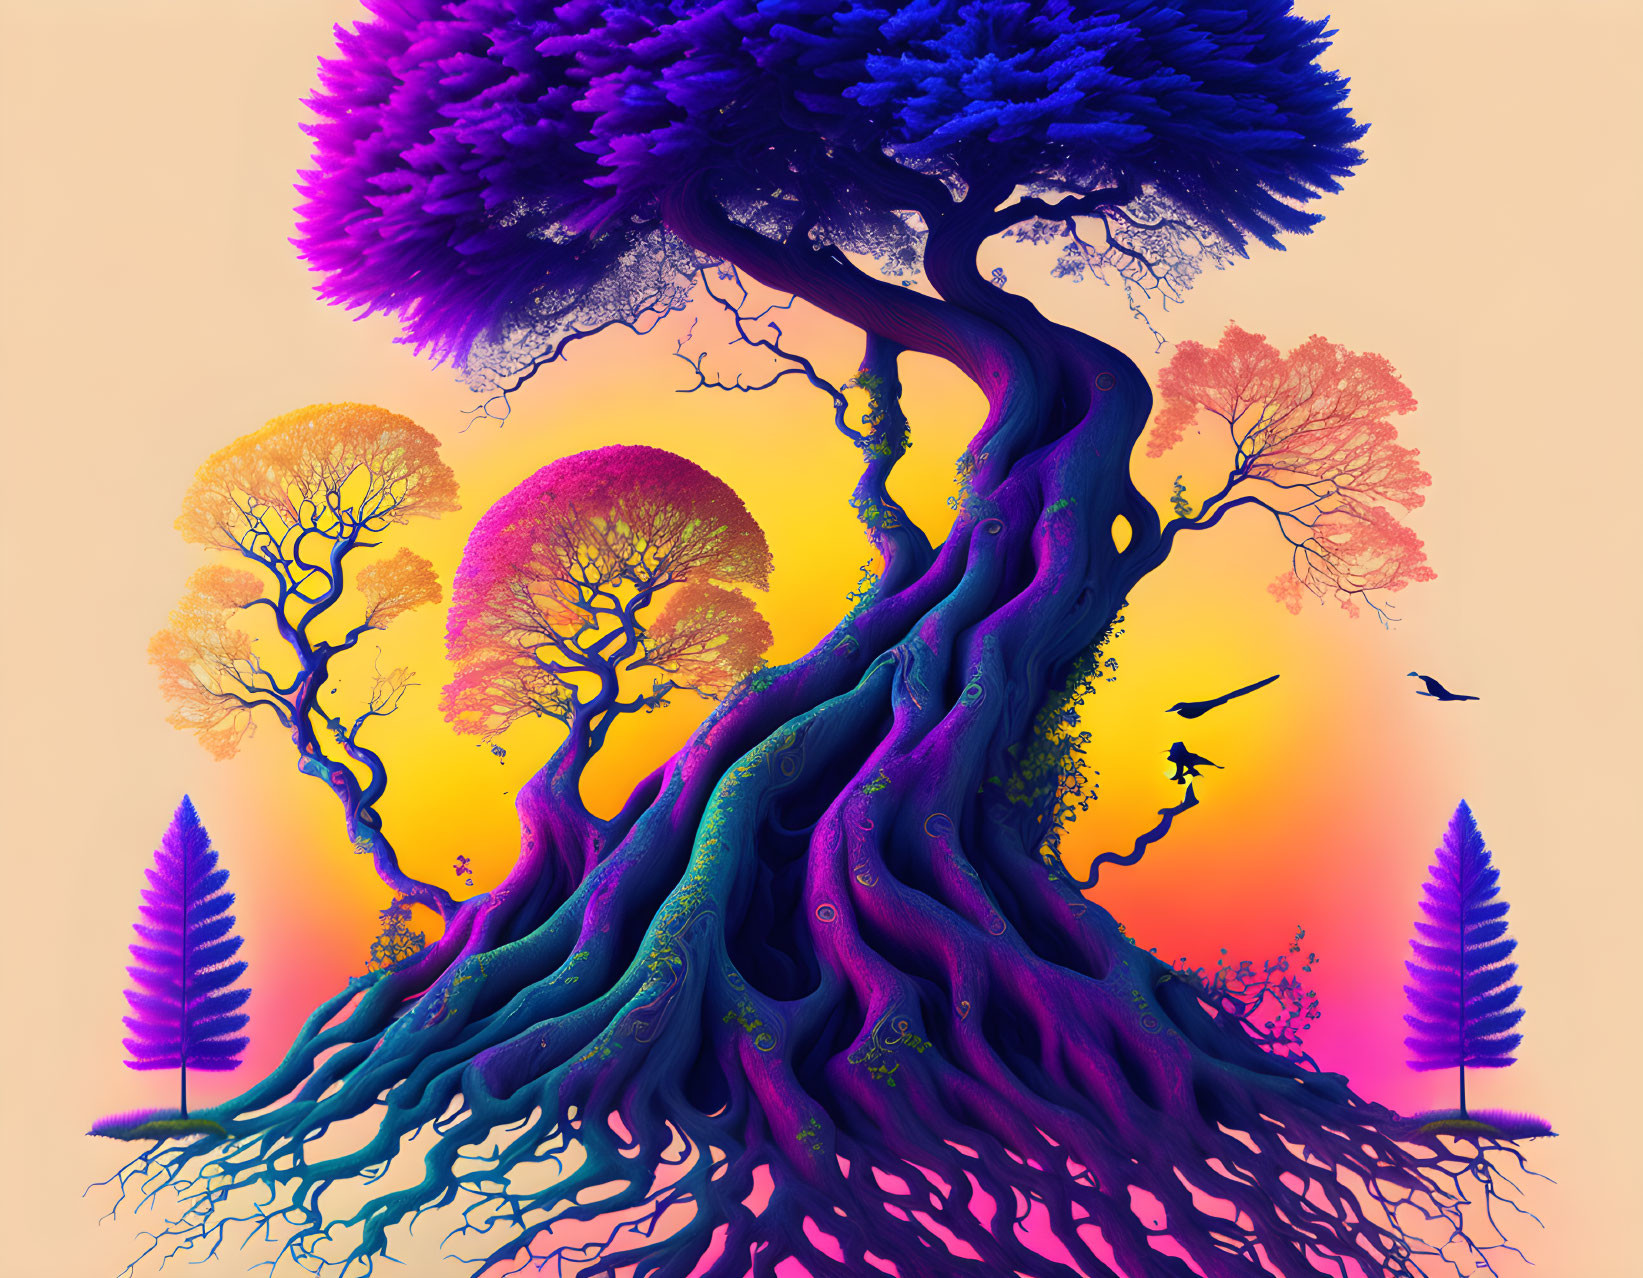 Colorful digital artwork: Twisted tree in purple, blue, and pink palette, with birds and